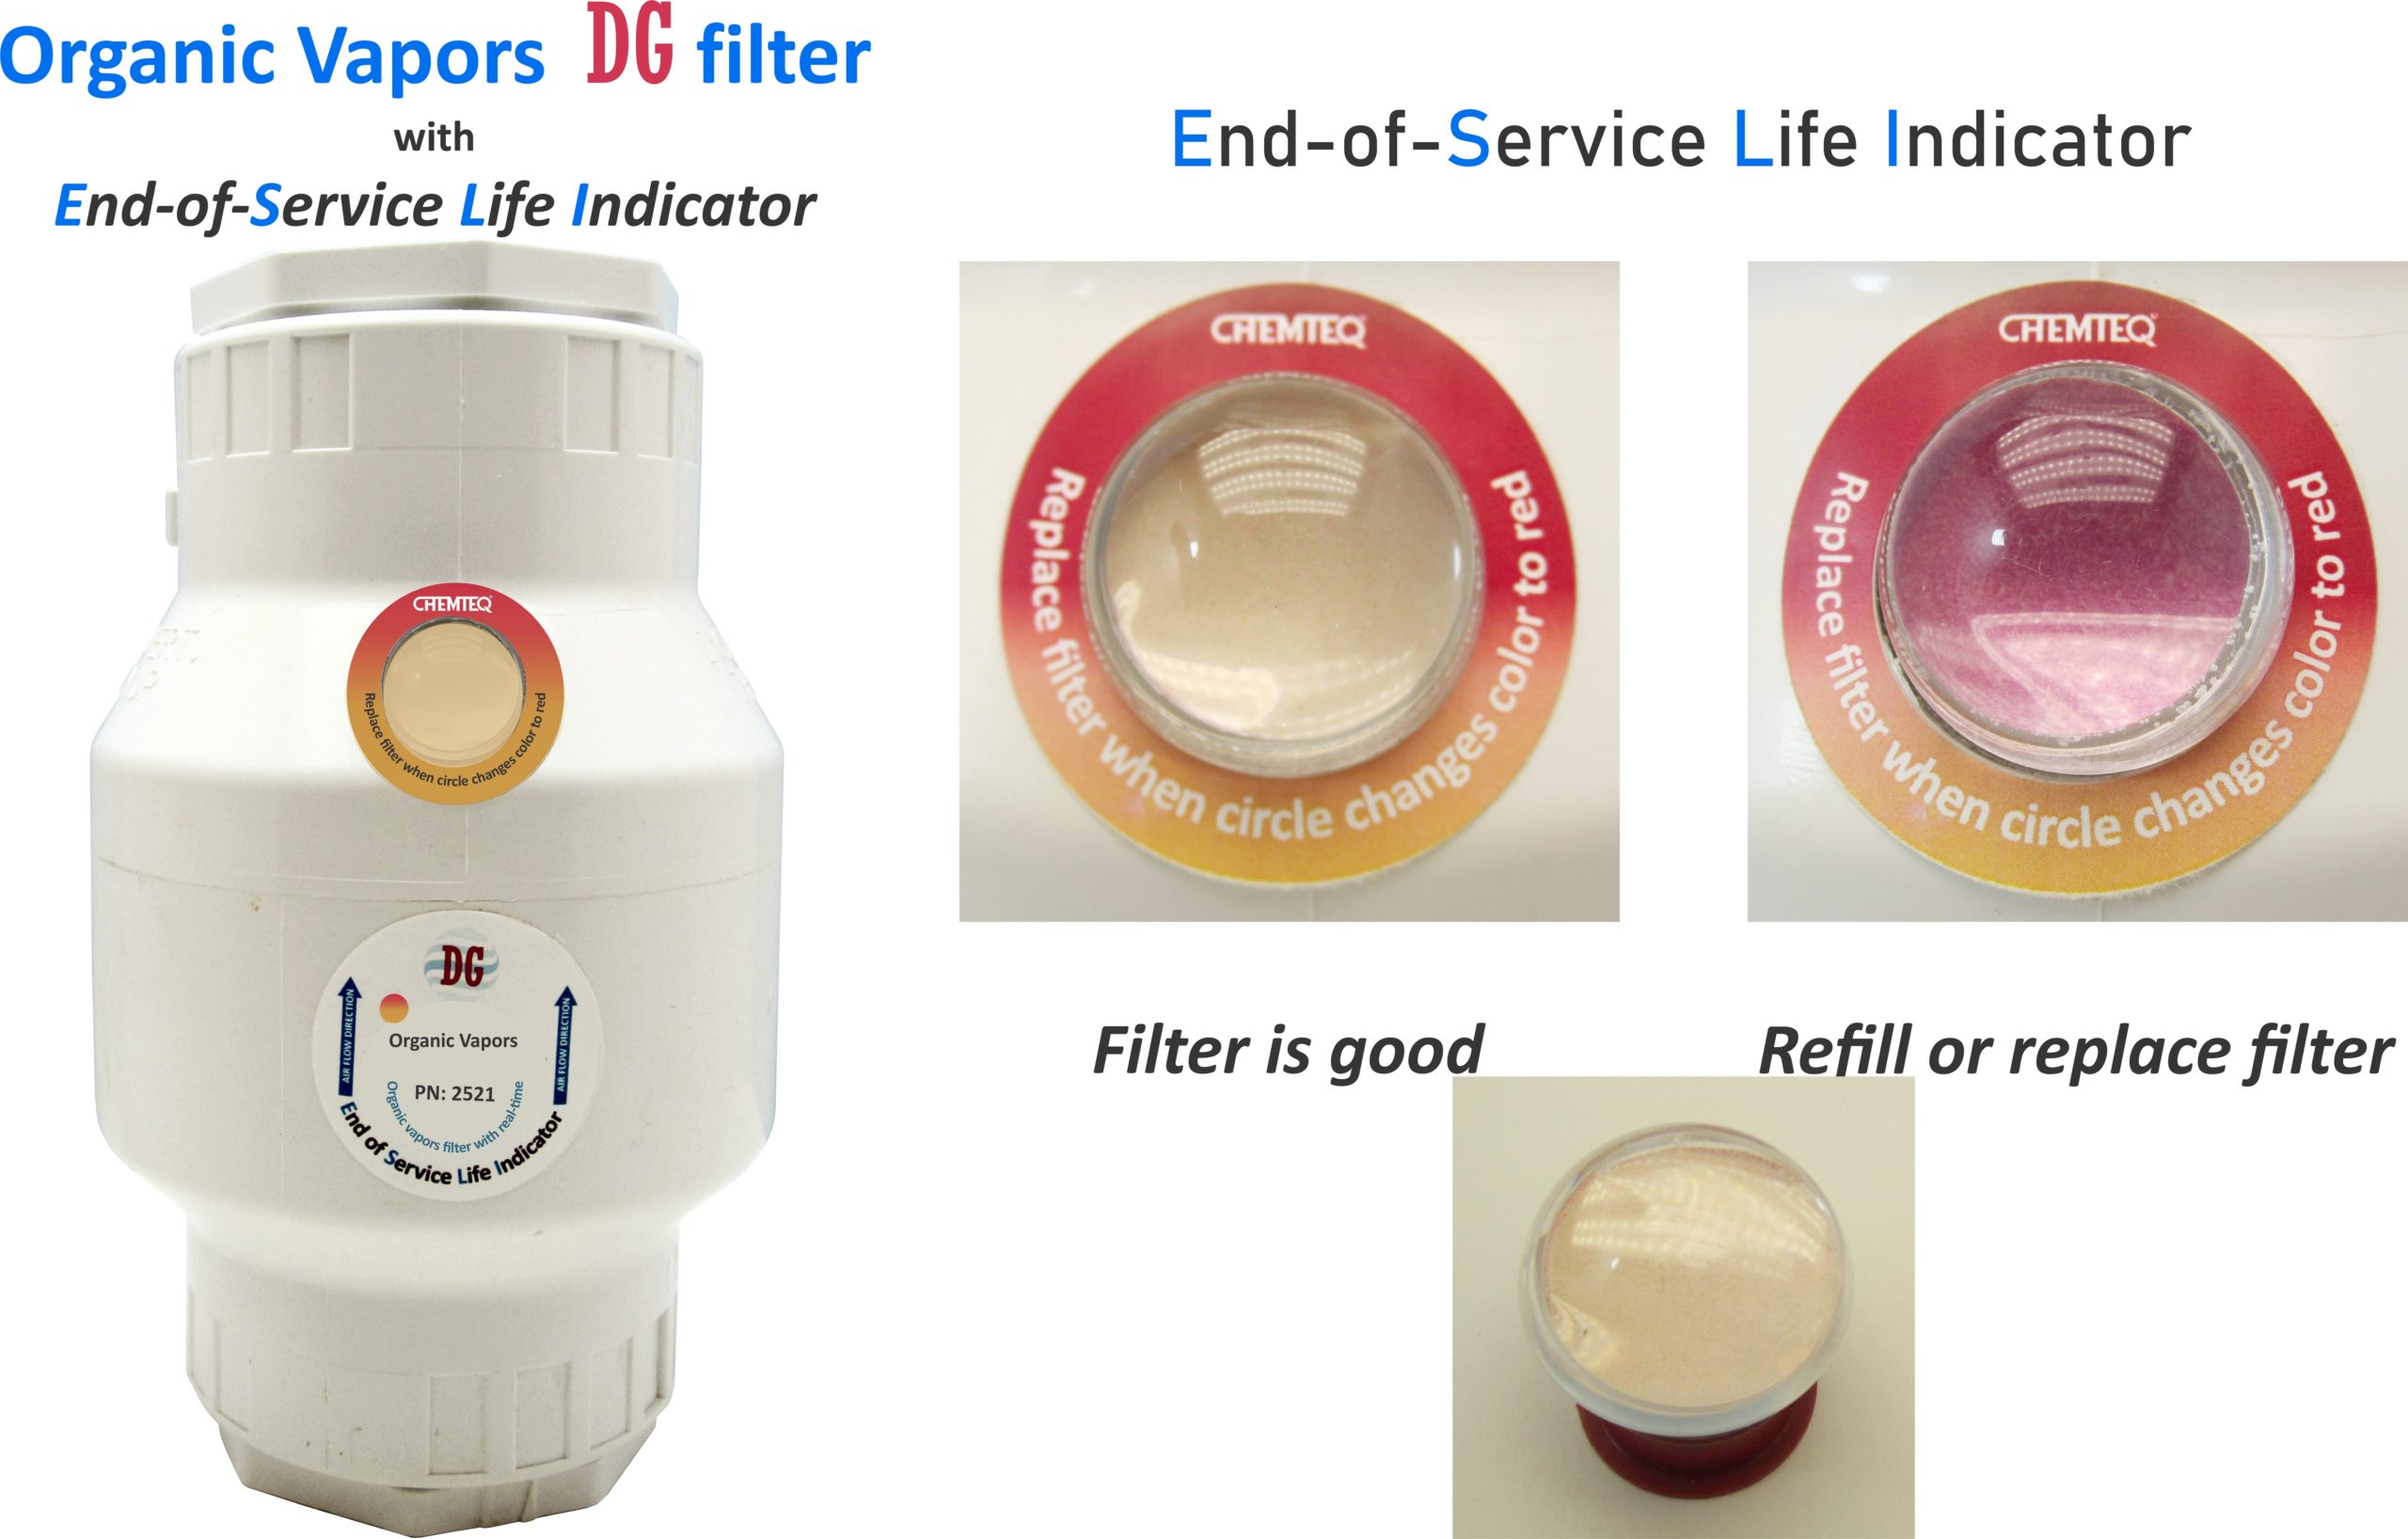 DG Filter 2500 S Manual with end-of-service life indicator